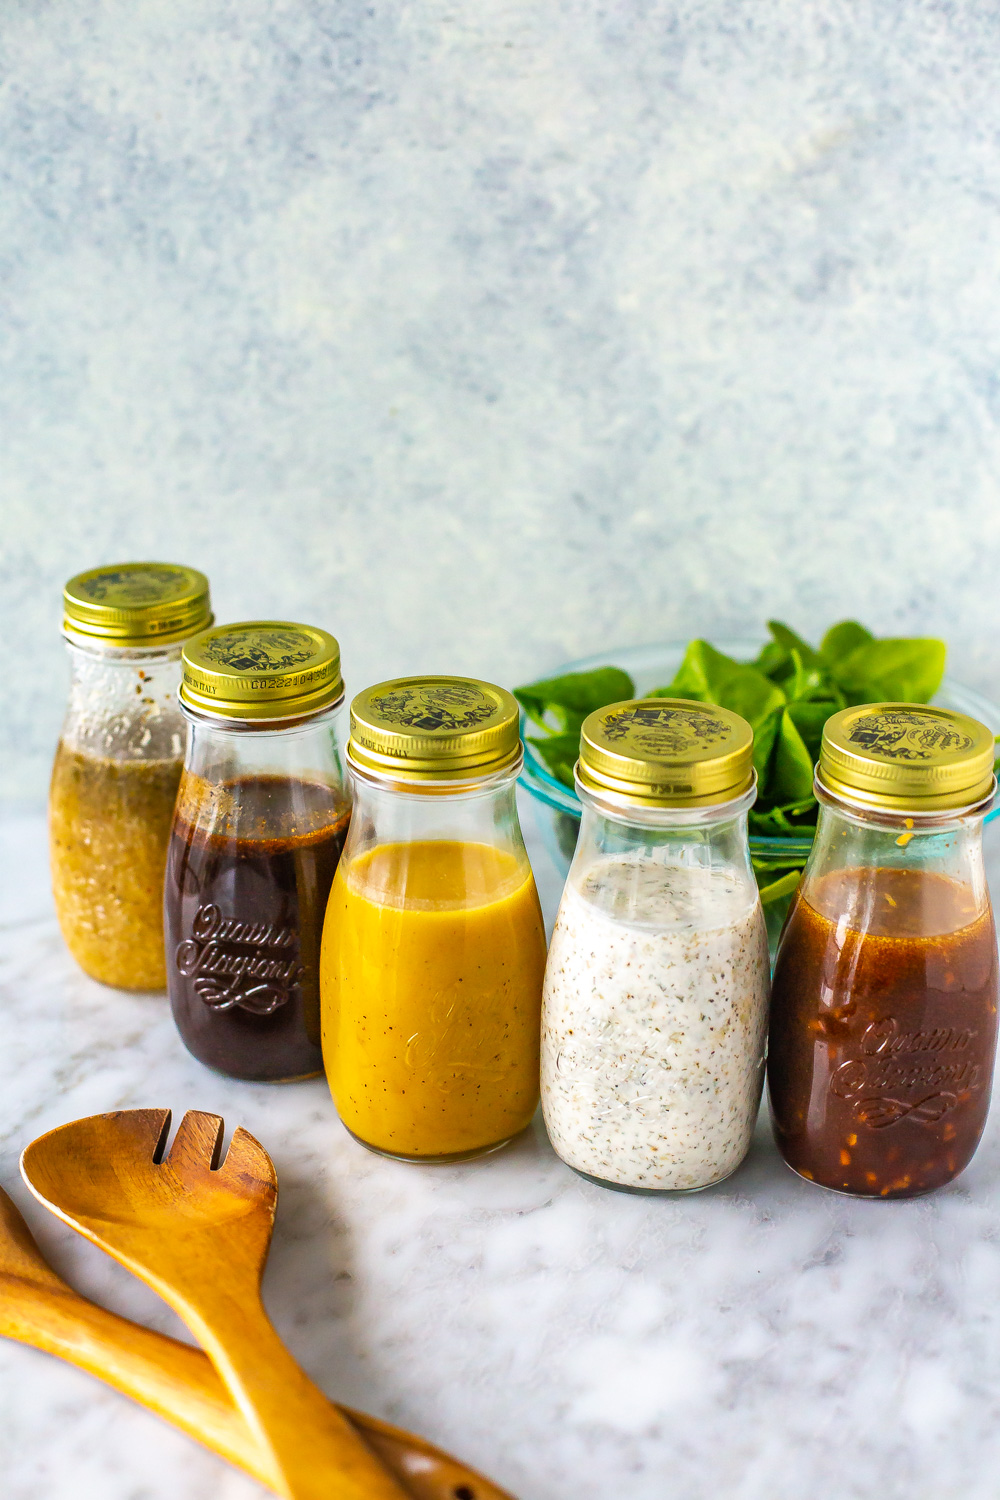 5 Best Homemade Salad Dressing Recipes - The Girl on Bloor